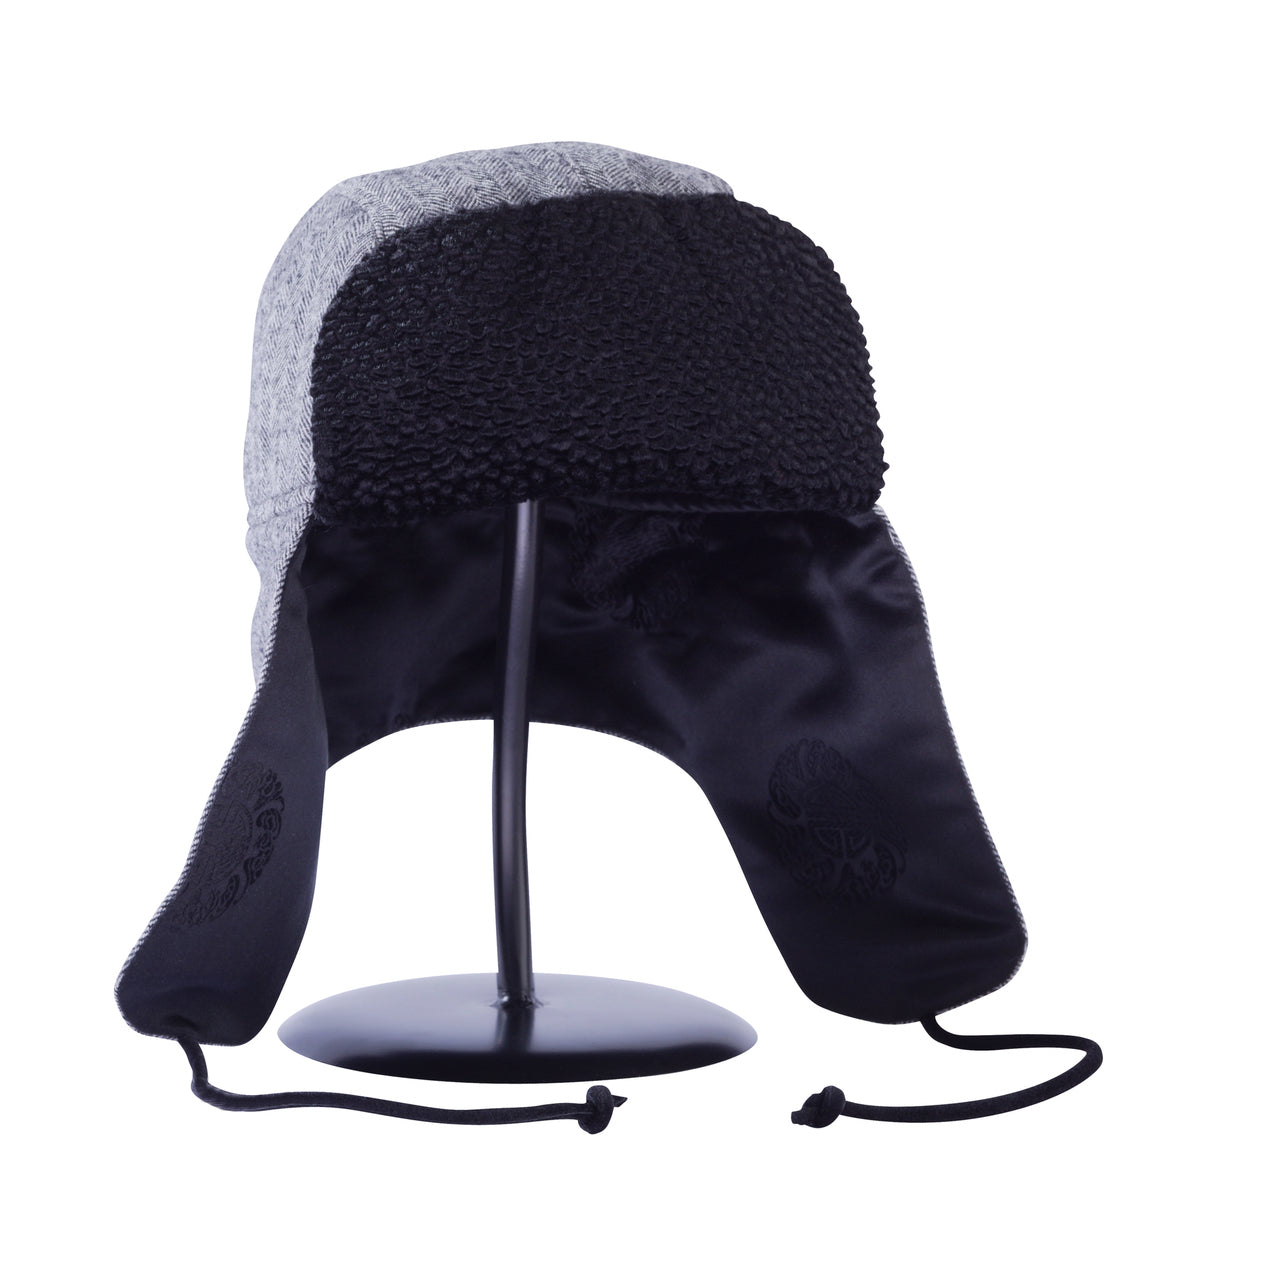 48 Pieces Bomber Hat With Fur LininG-TwO-Tone SuedE-Like - Trapper Hats -  at 